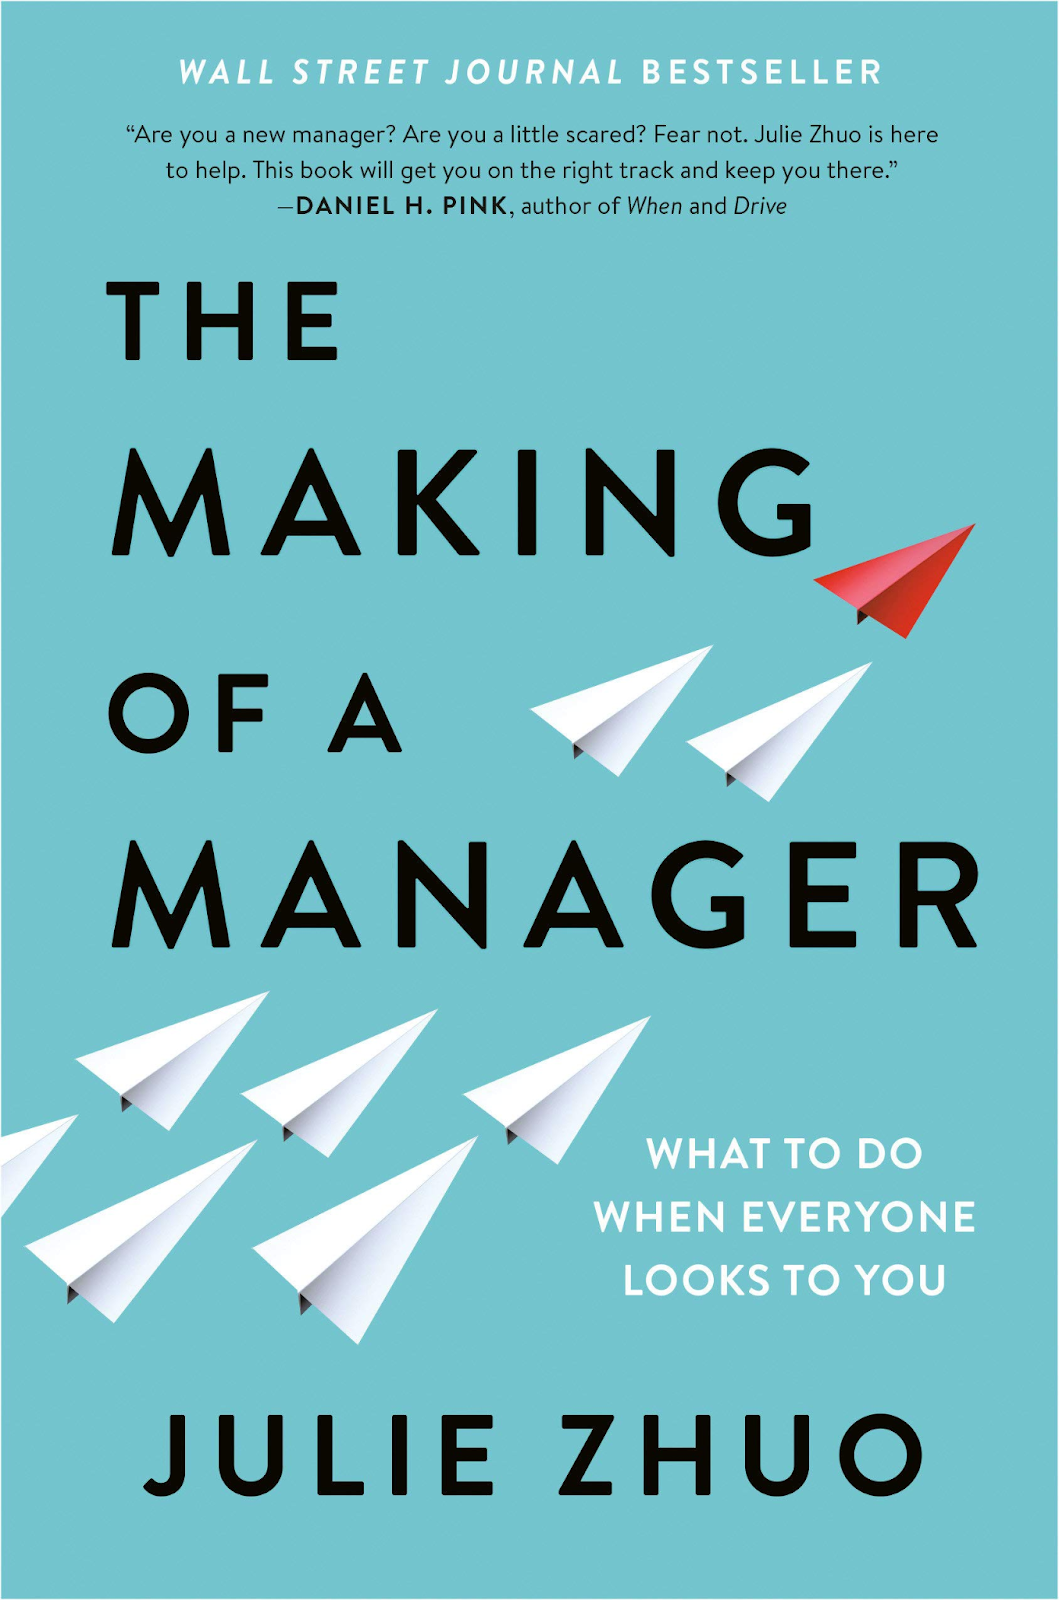  The Making of a Manager - best product management books